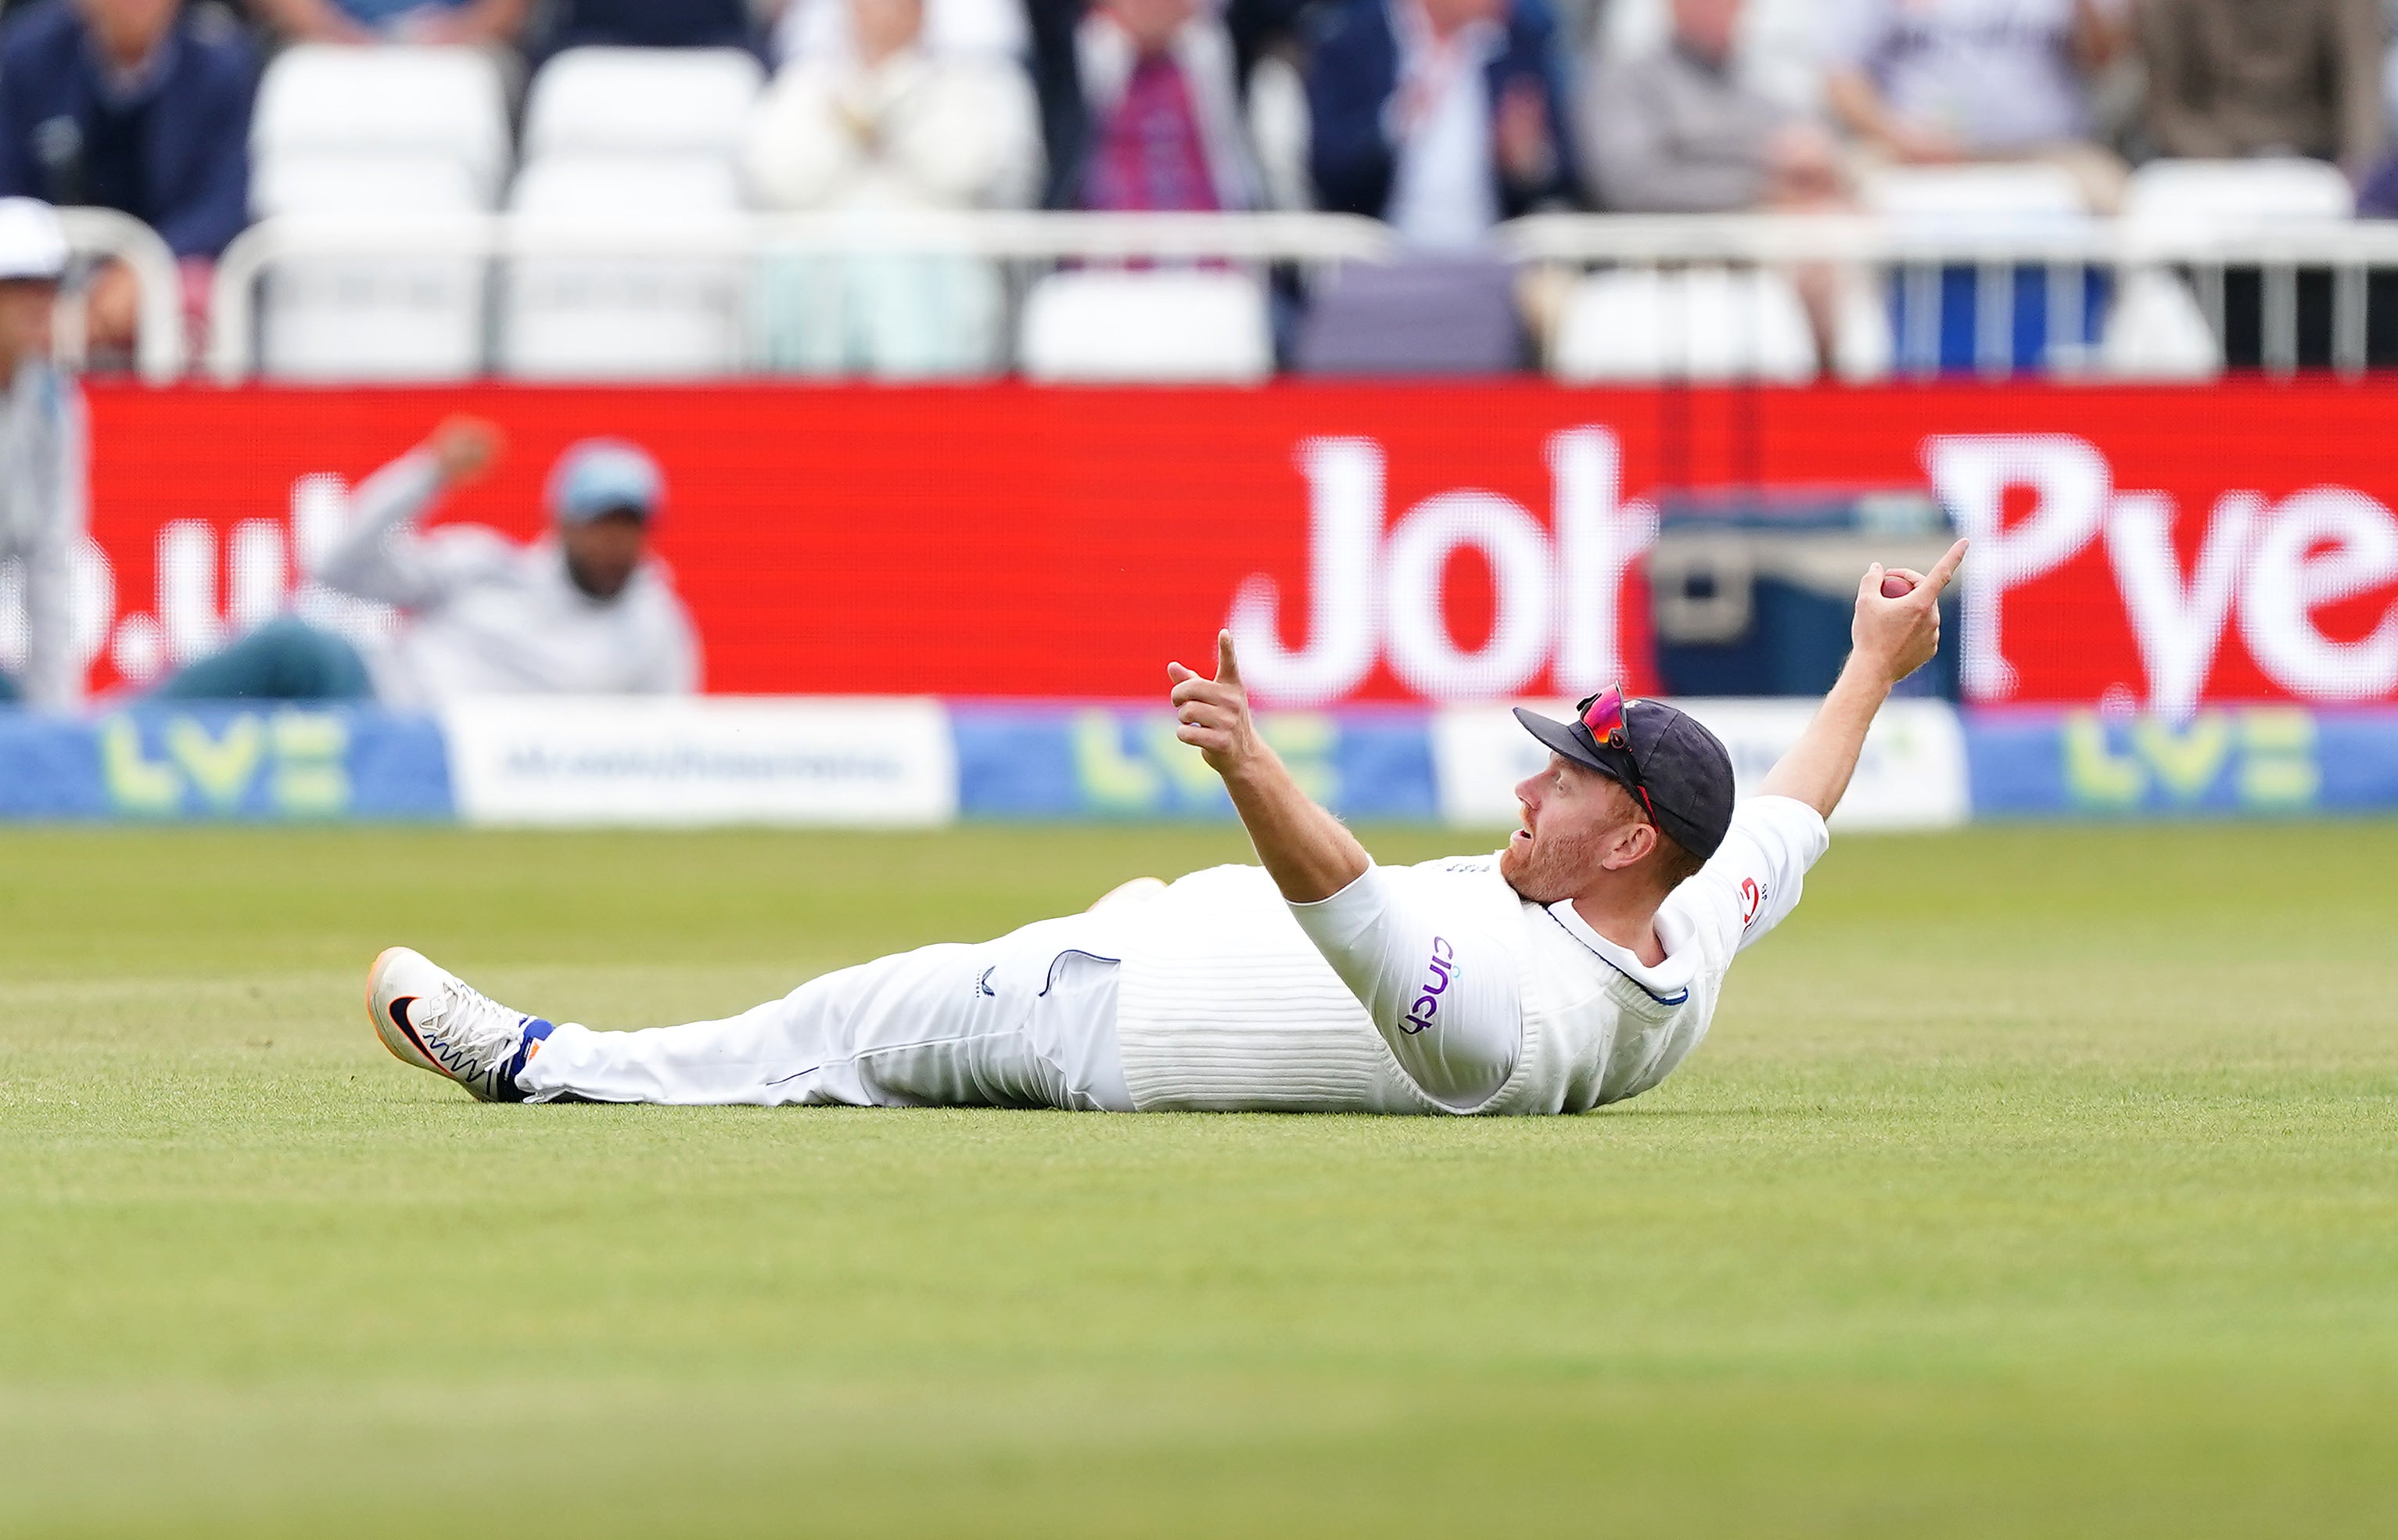 Jonny Bairstow, pictured, caught Devon Conway (Mike Egerton/PA)